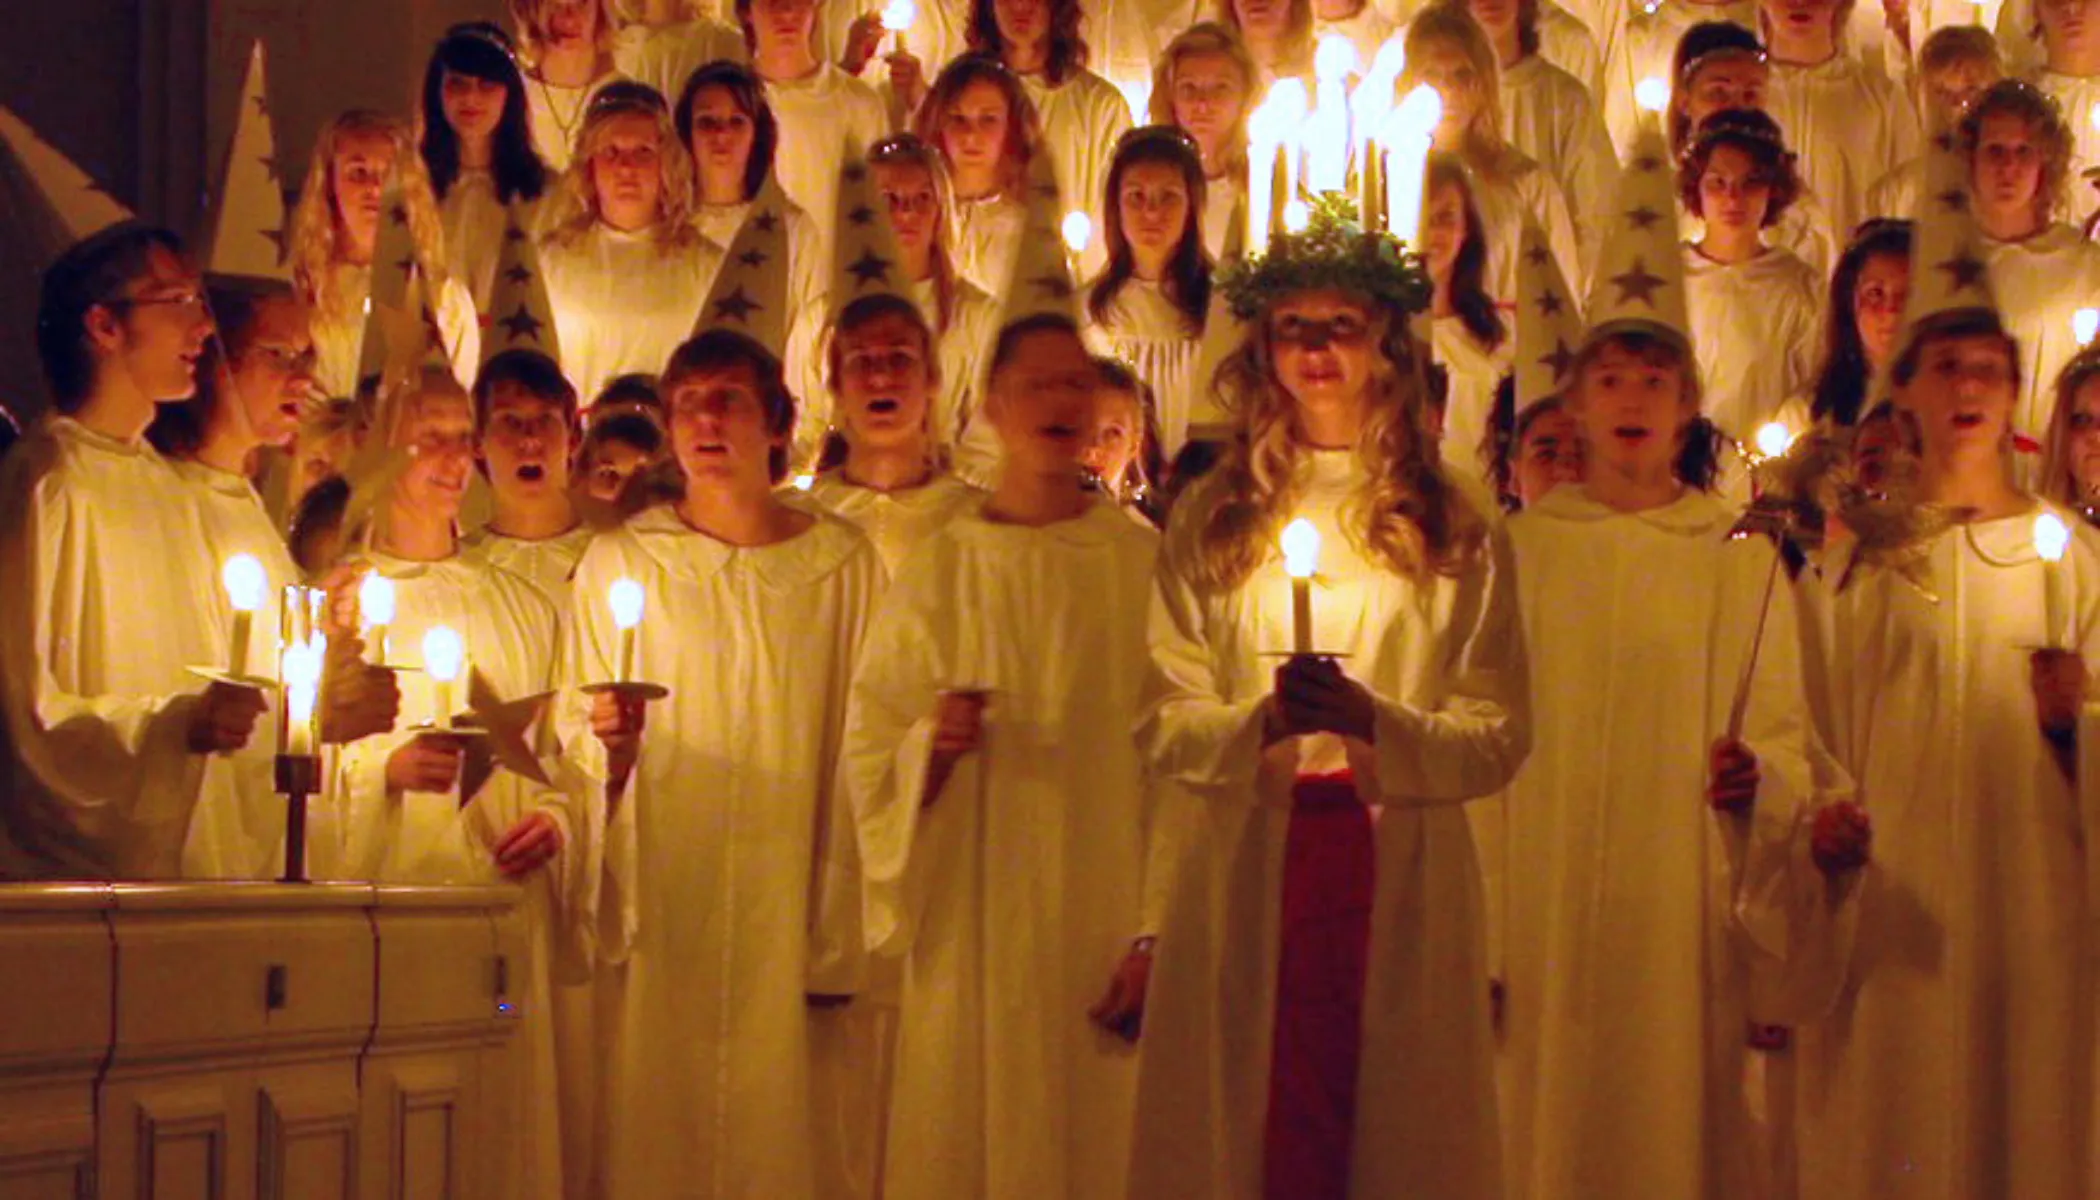 Children participate in the annual St. Lucy's Day celebration in Sweden.?w=200&h=150